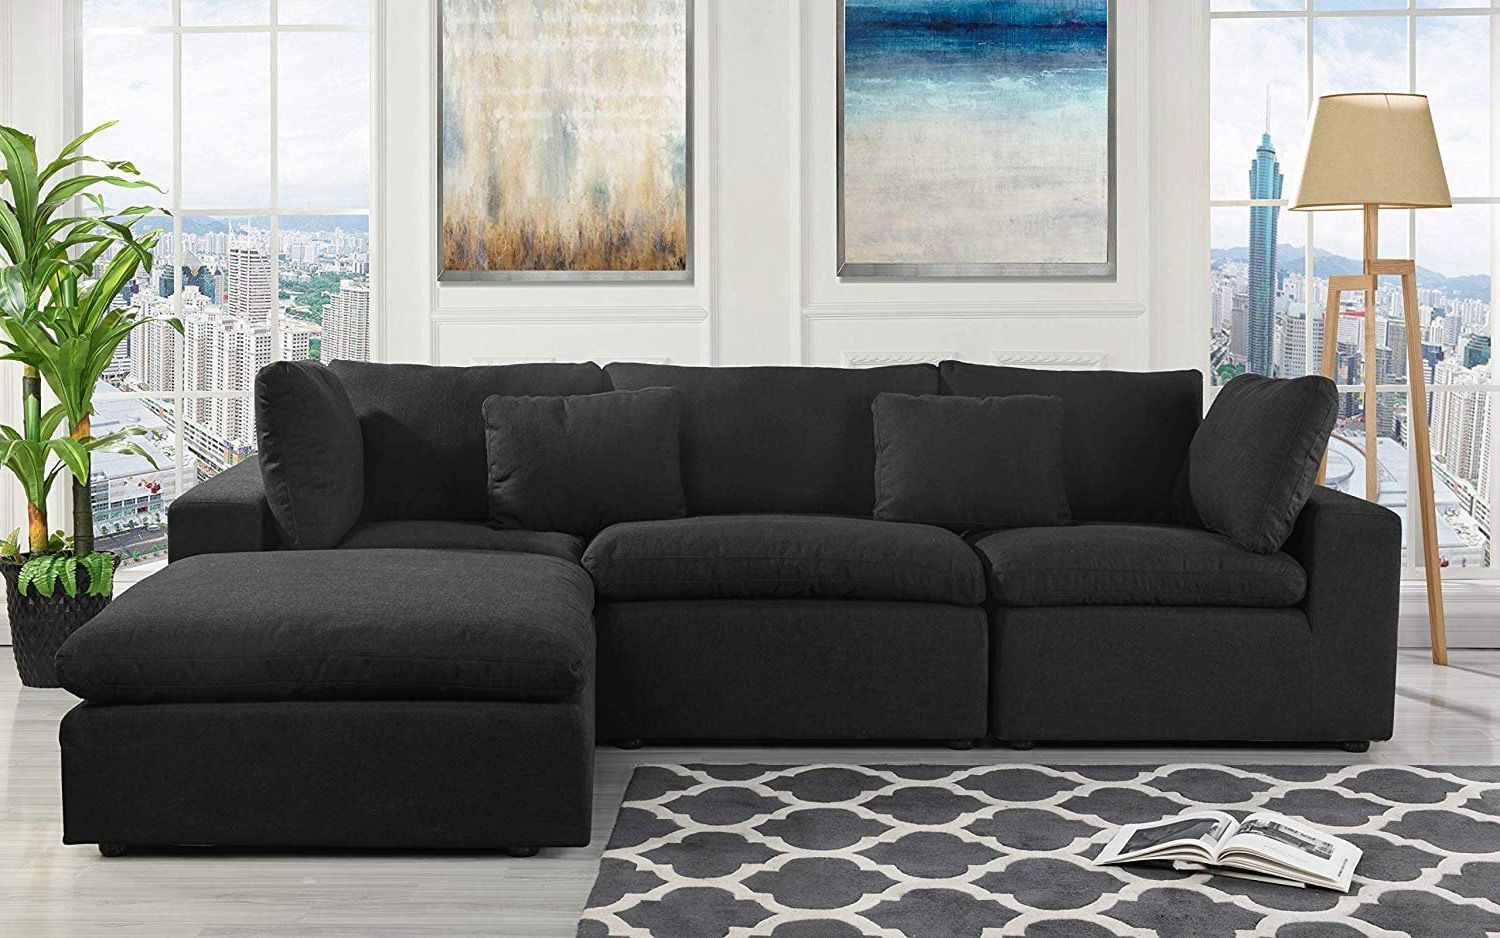 2018 Classic Large Linen Fabric Sectional Sofa, L Shape Couch With Wide With Sofas In Black (View 14 of 15)